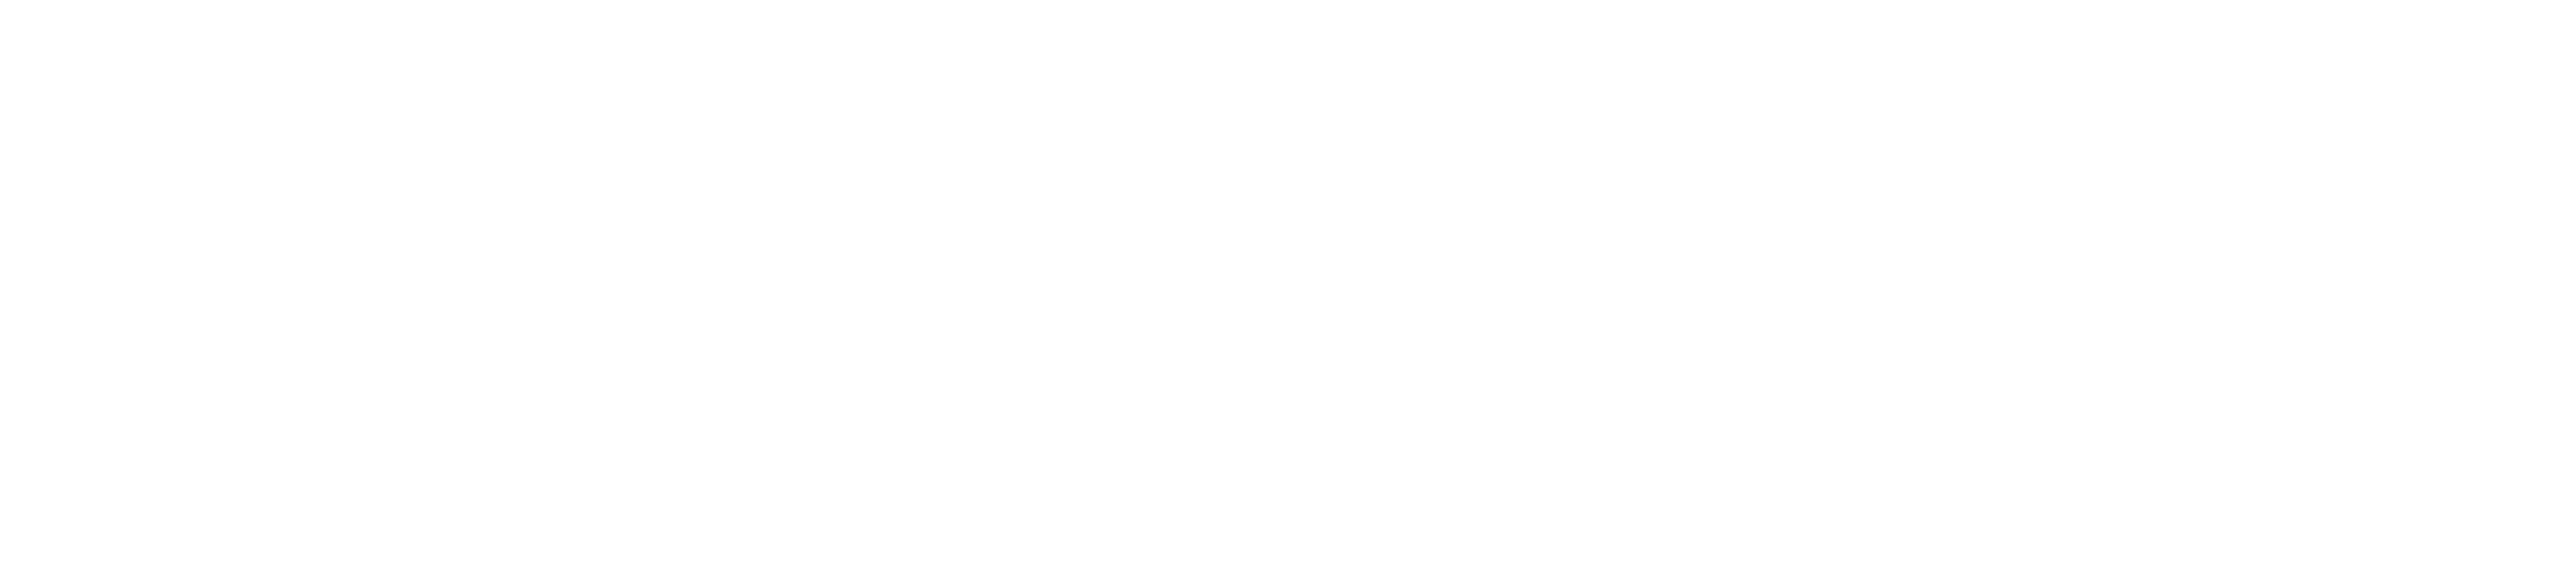 funded by european union